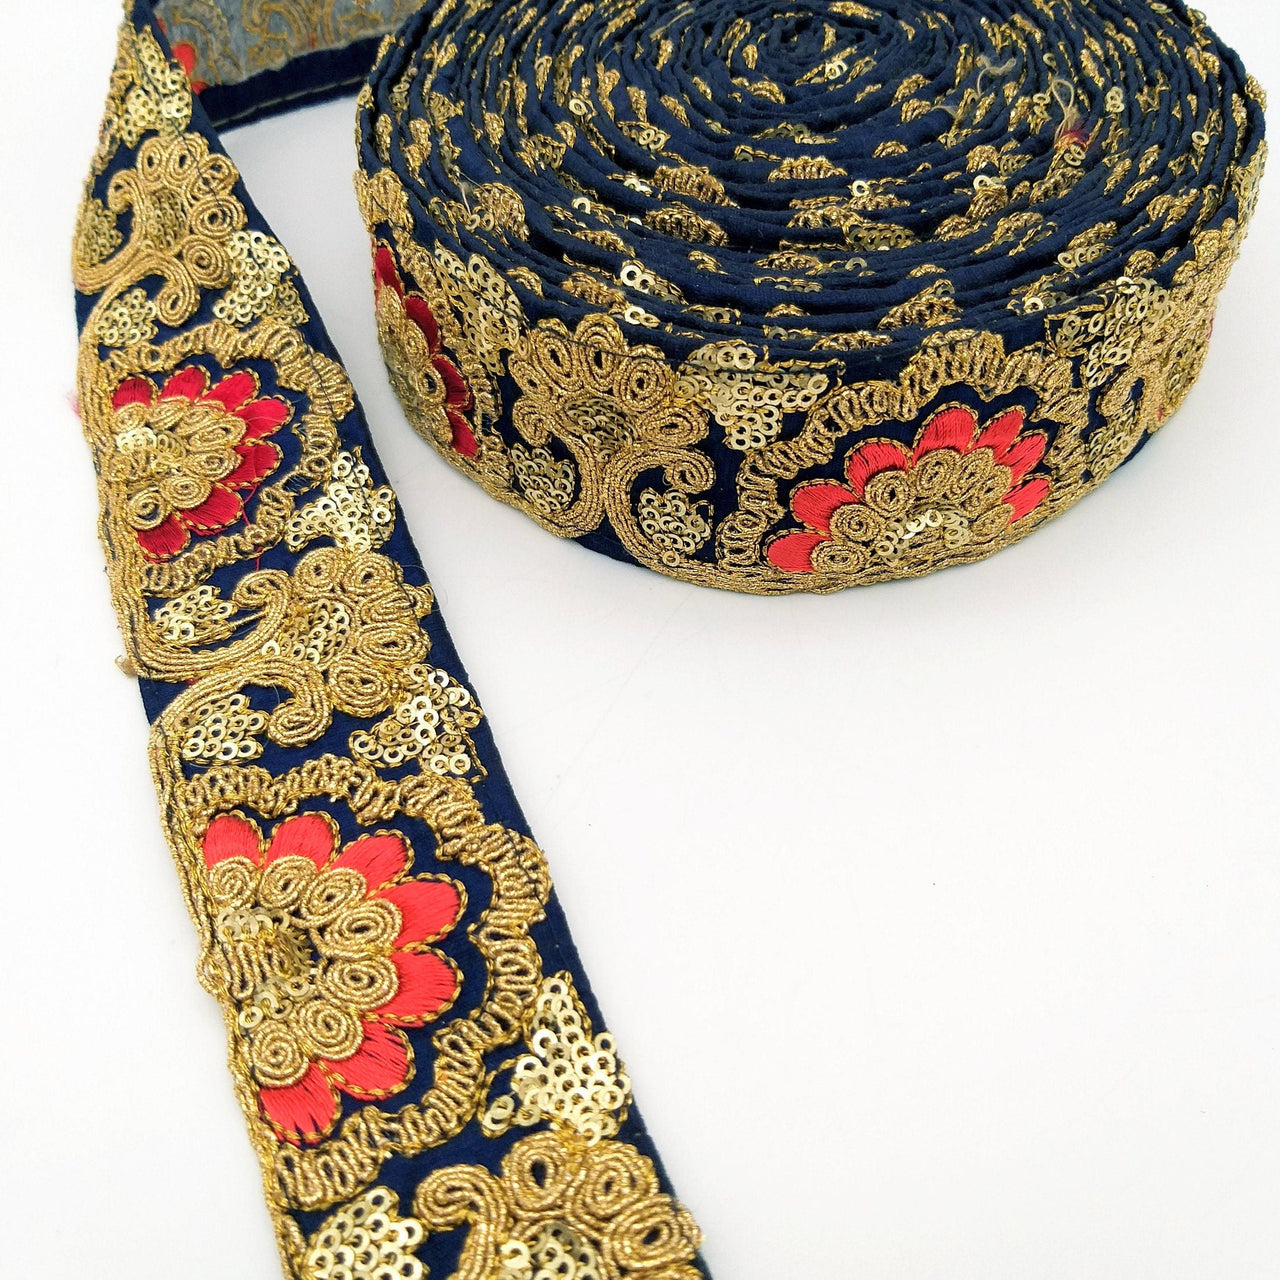 Navy Blue Art Silk Trim With Intricate Floral Embroidery With Sequins, Lace Trim, Indian Lace Trim